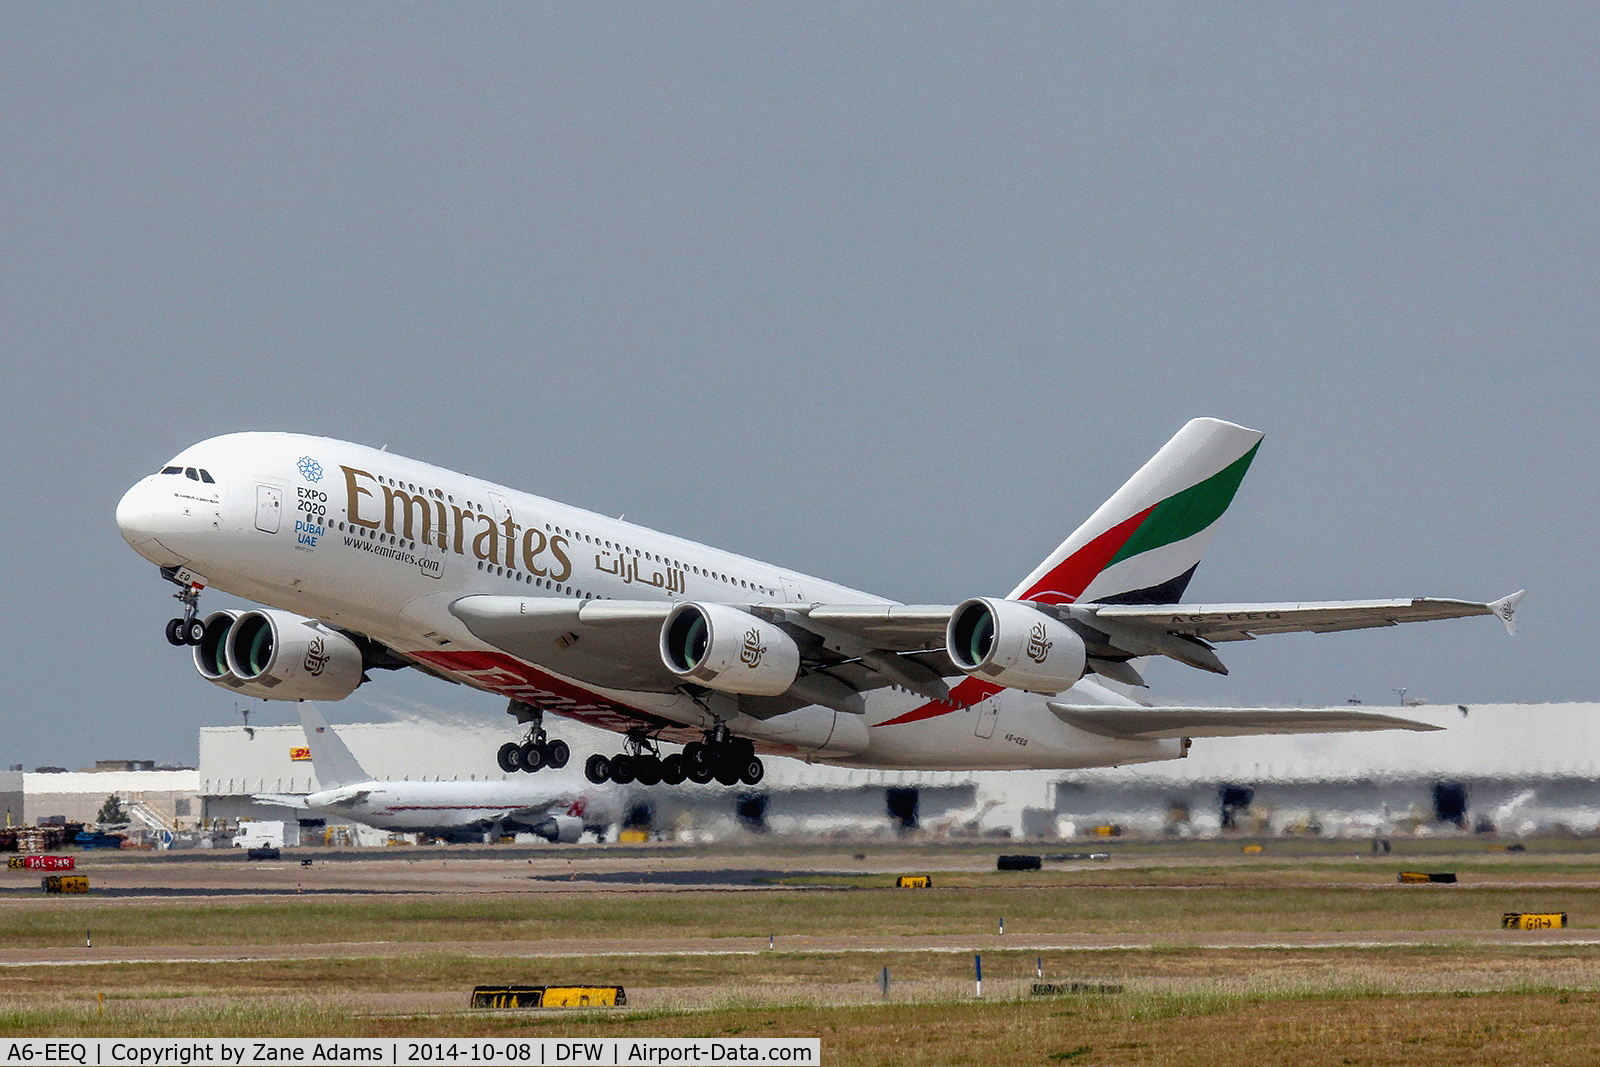 A6-EEQ, 2013 Airbus A380-861 C/N 141, The First Emirates A380 flight departing DFW Airport